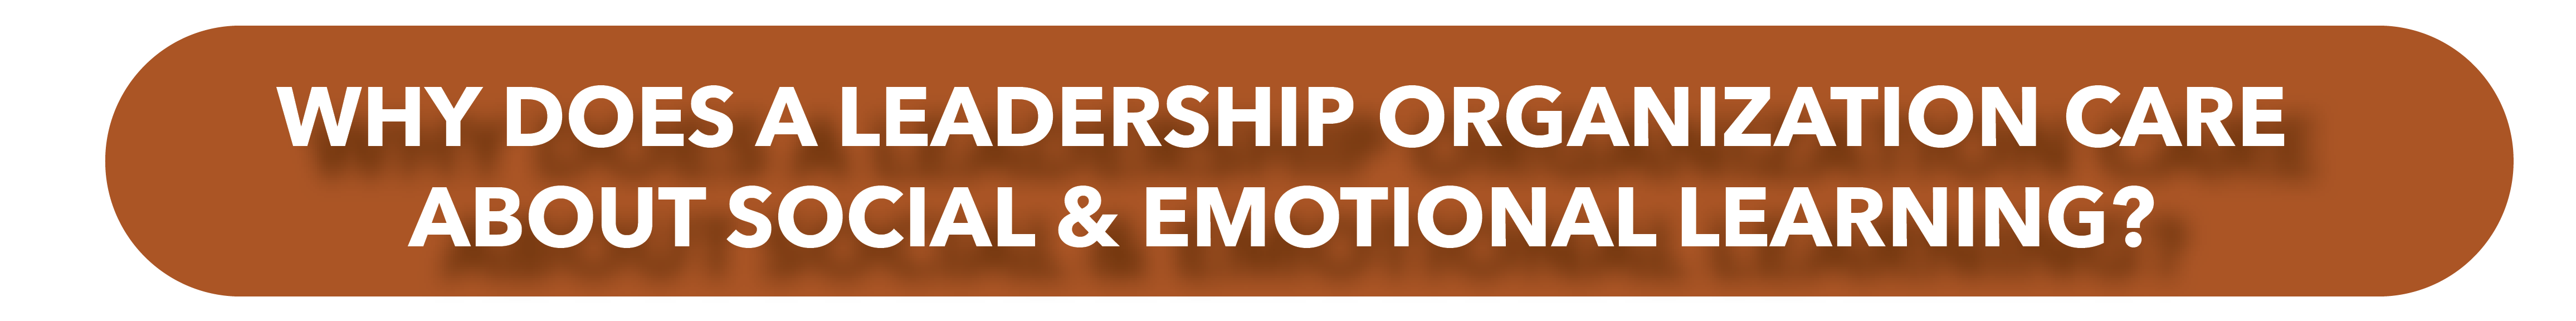 Why Does A Leadership Organization Care About Social and Emotional Learning?